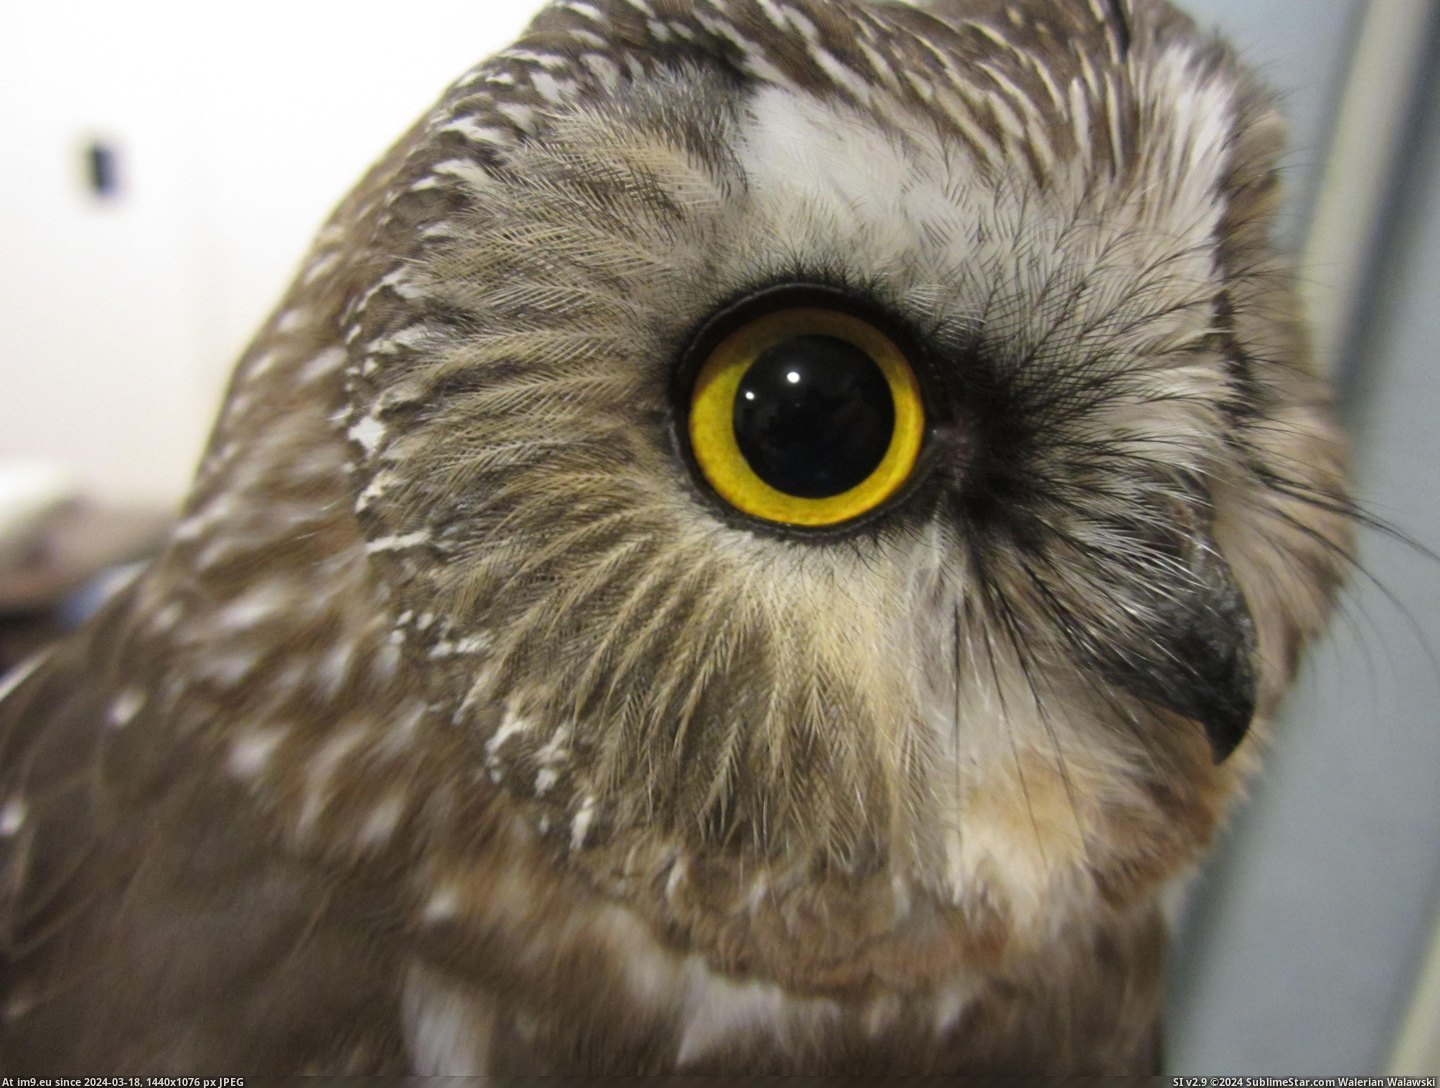 #Photos #Owls #Research #Tiny [Pics] More photos of my research on tiny owls! 24 Pic. (Image of album My r/PICS favs))